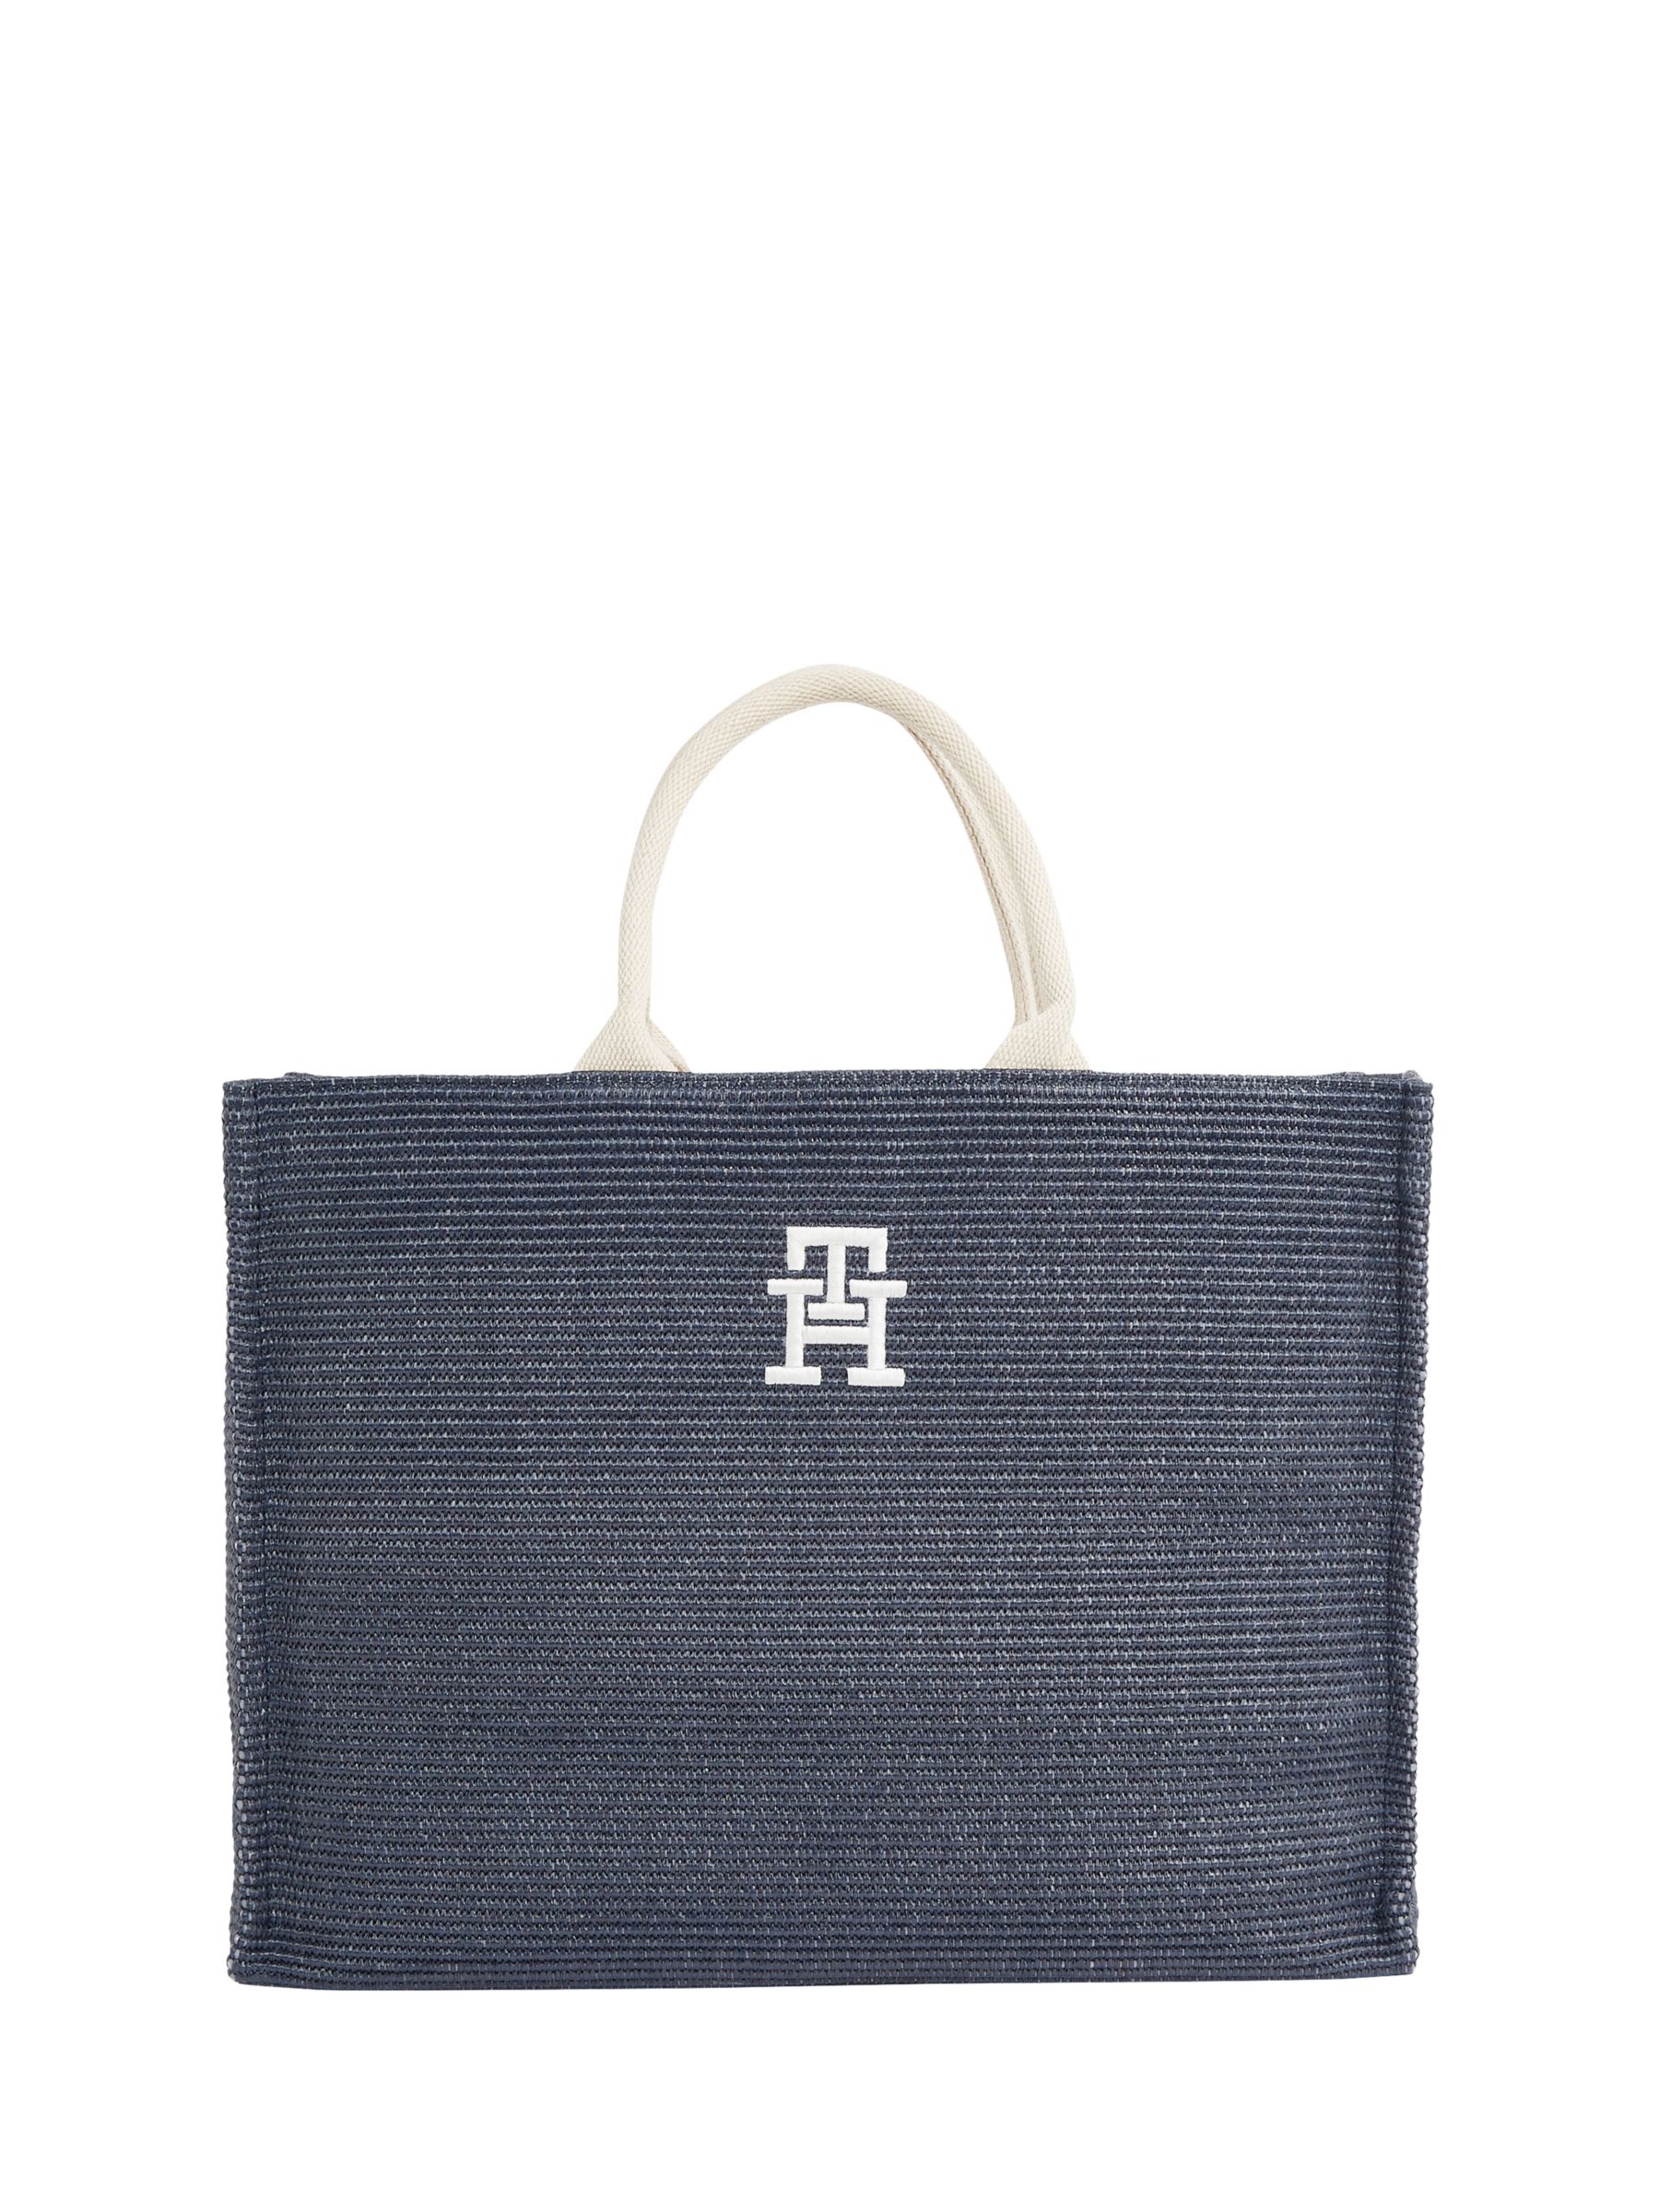 Tommy Hilfiger Beach Tote Bag, Space Blue, One Size